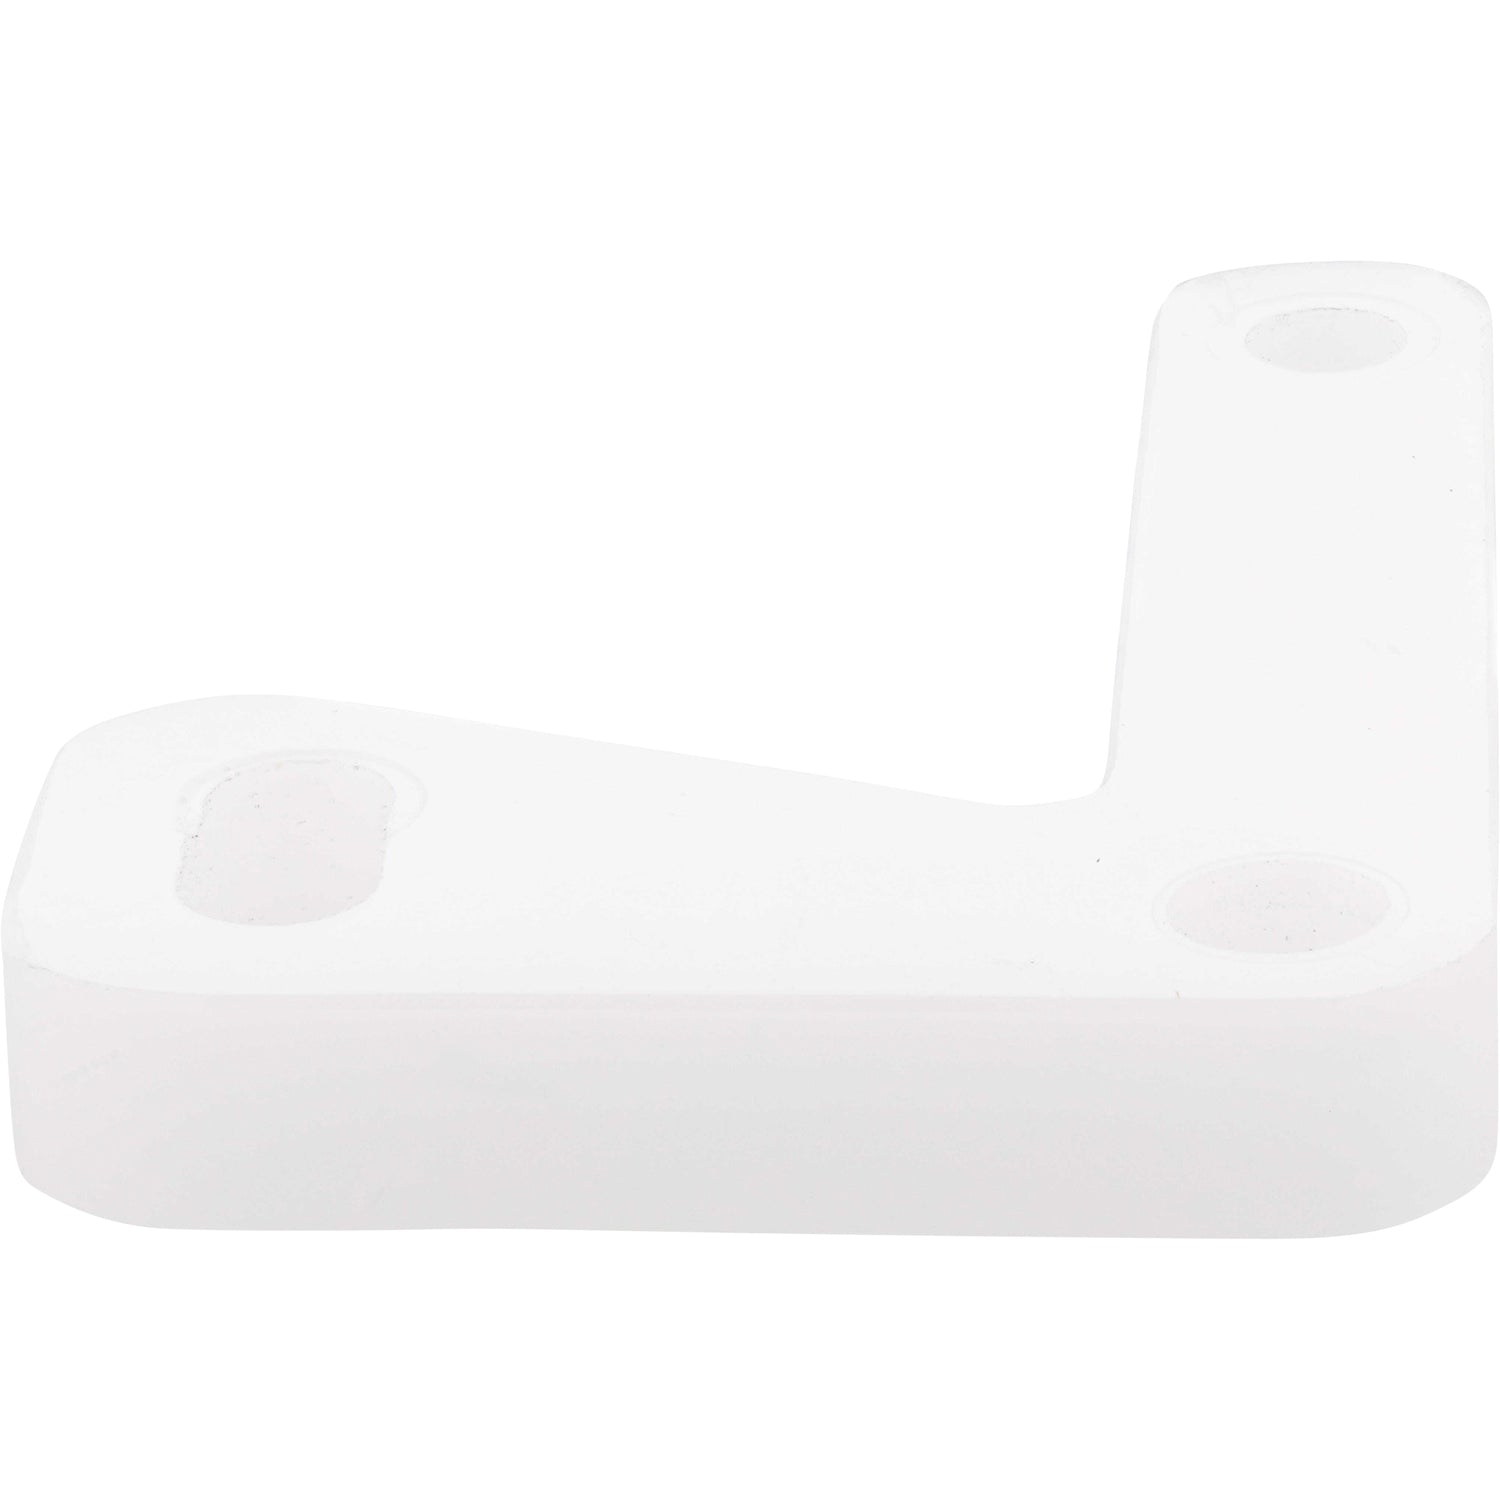 White L shaped plastic part with three holes cut into it for mounting purposes. Part shown on white background.